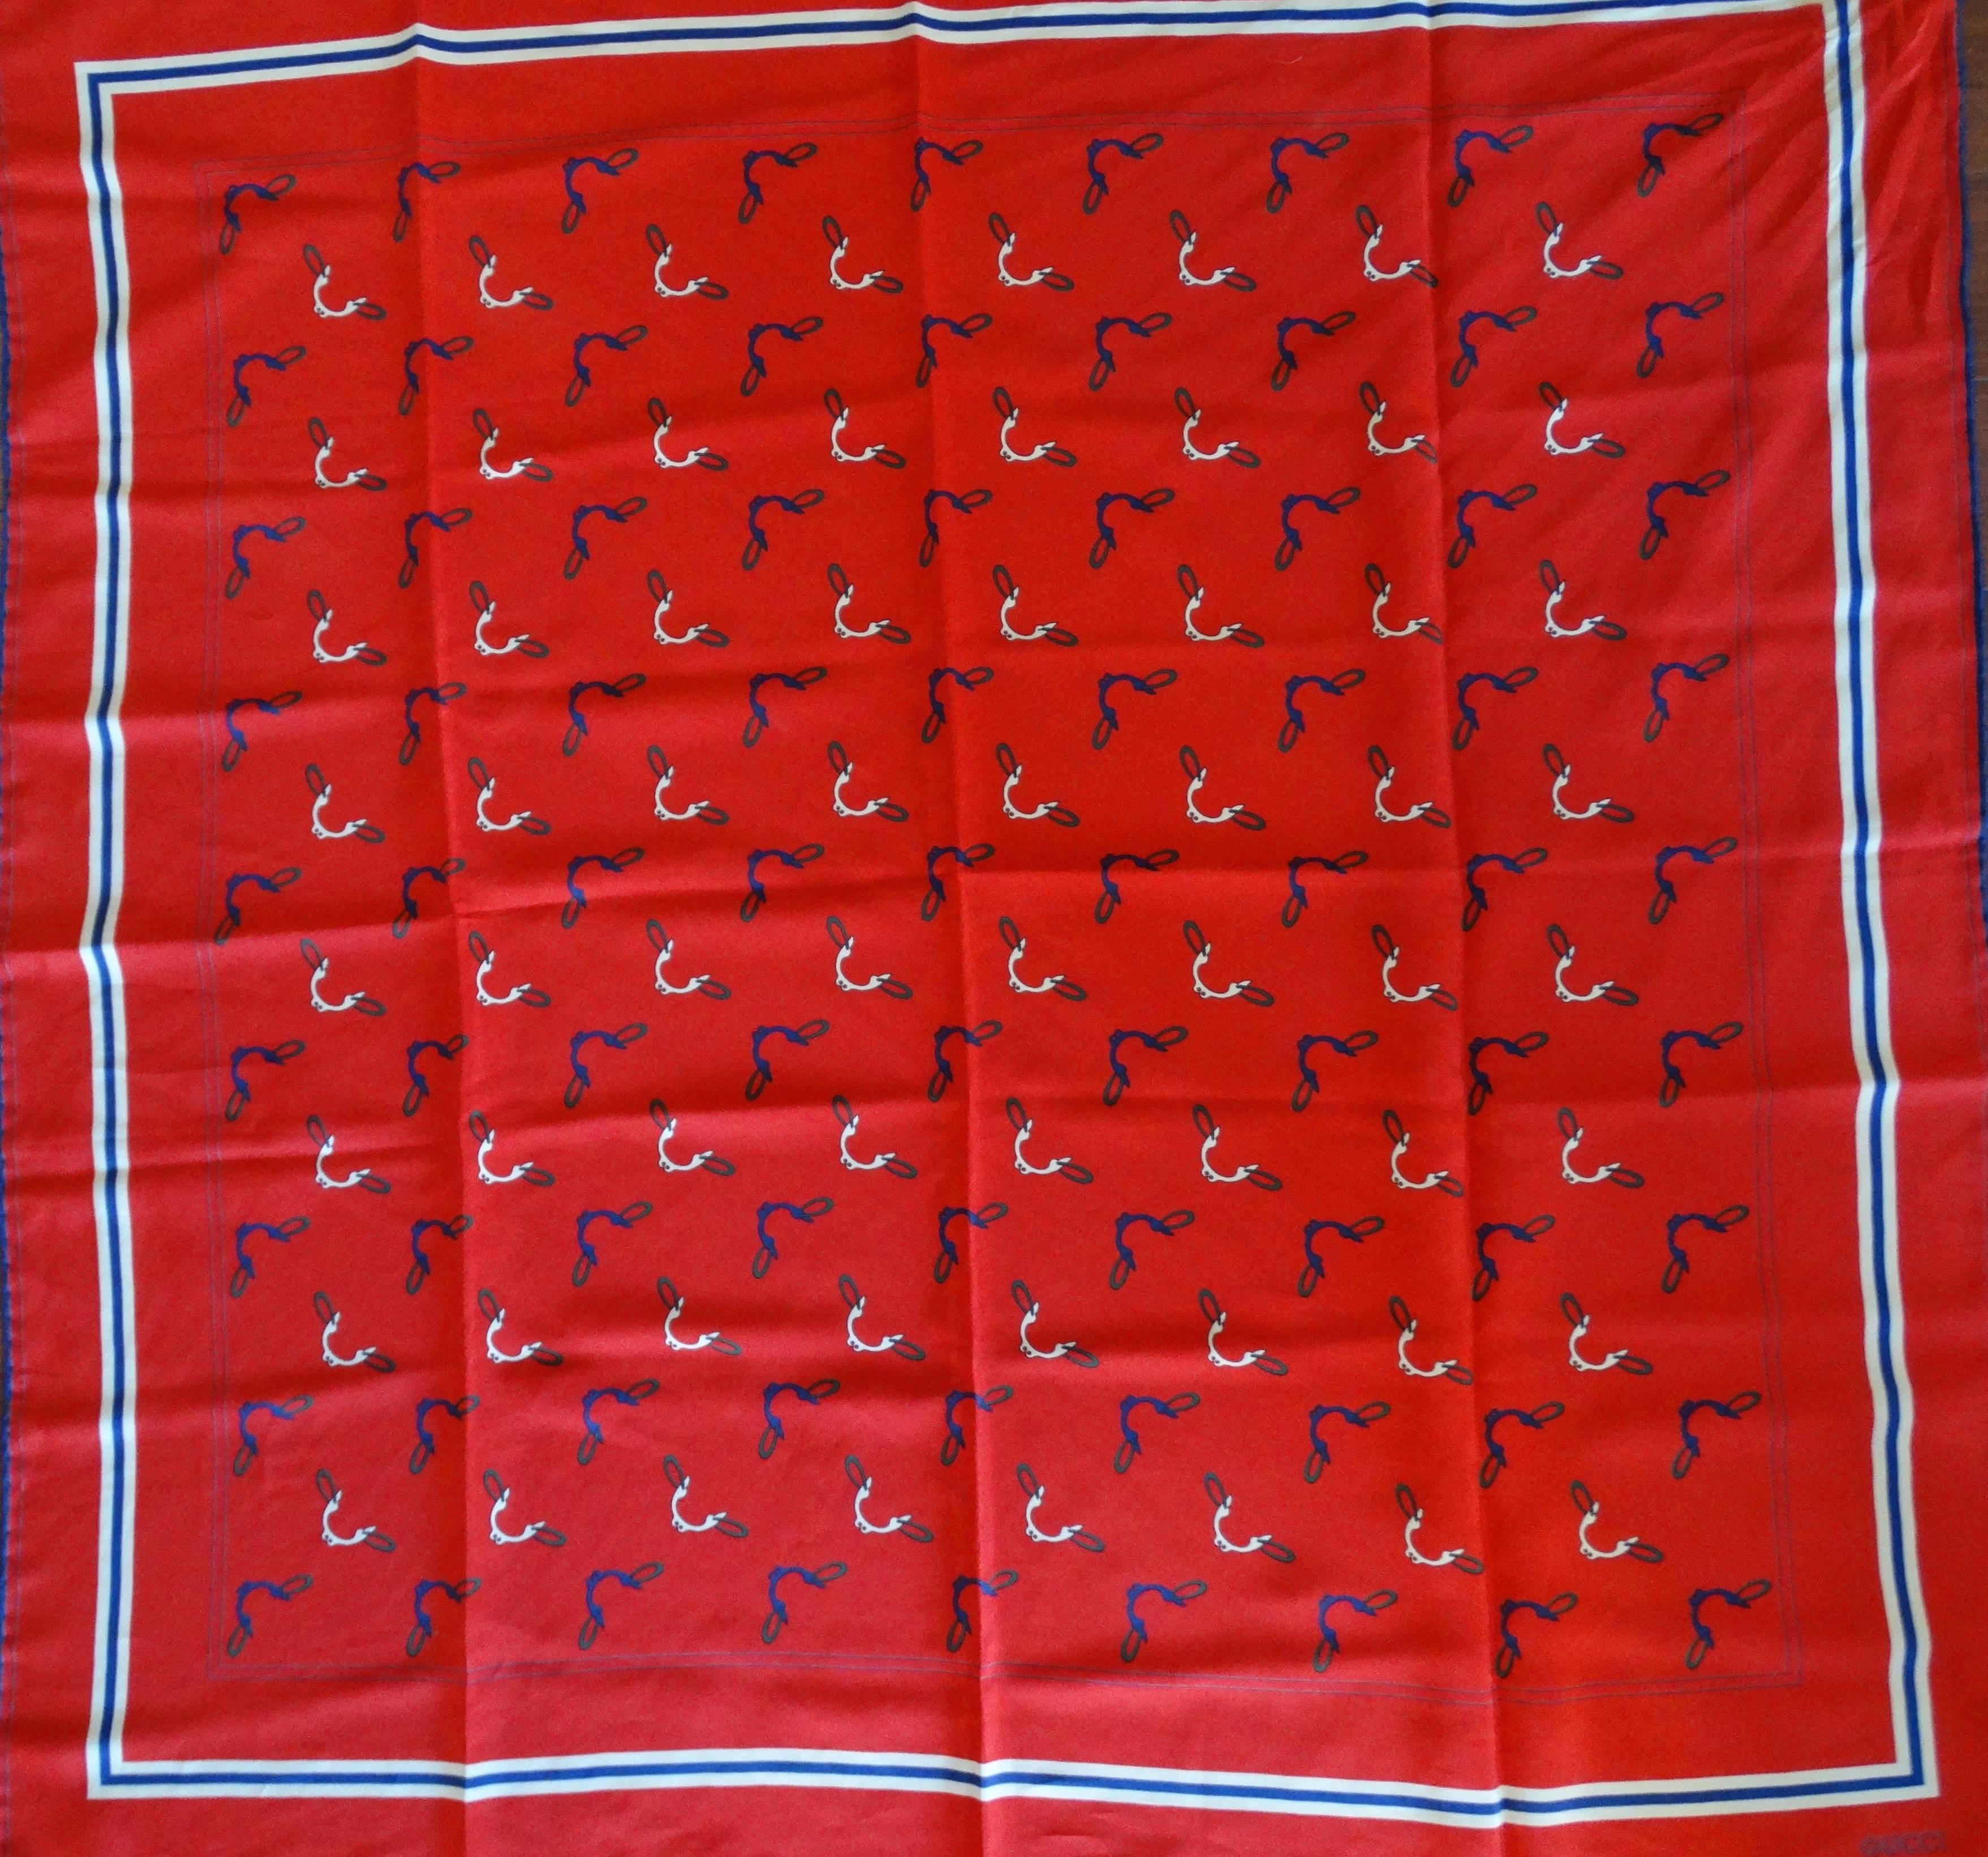 It goes without saying, this piece is a classic! Bright red vintage Gucci silk square scarf from the 1980s! Red solid base with blue, green and white horse bit print all over. This piece is so versatile- wear it as a headscarf, tied around your